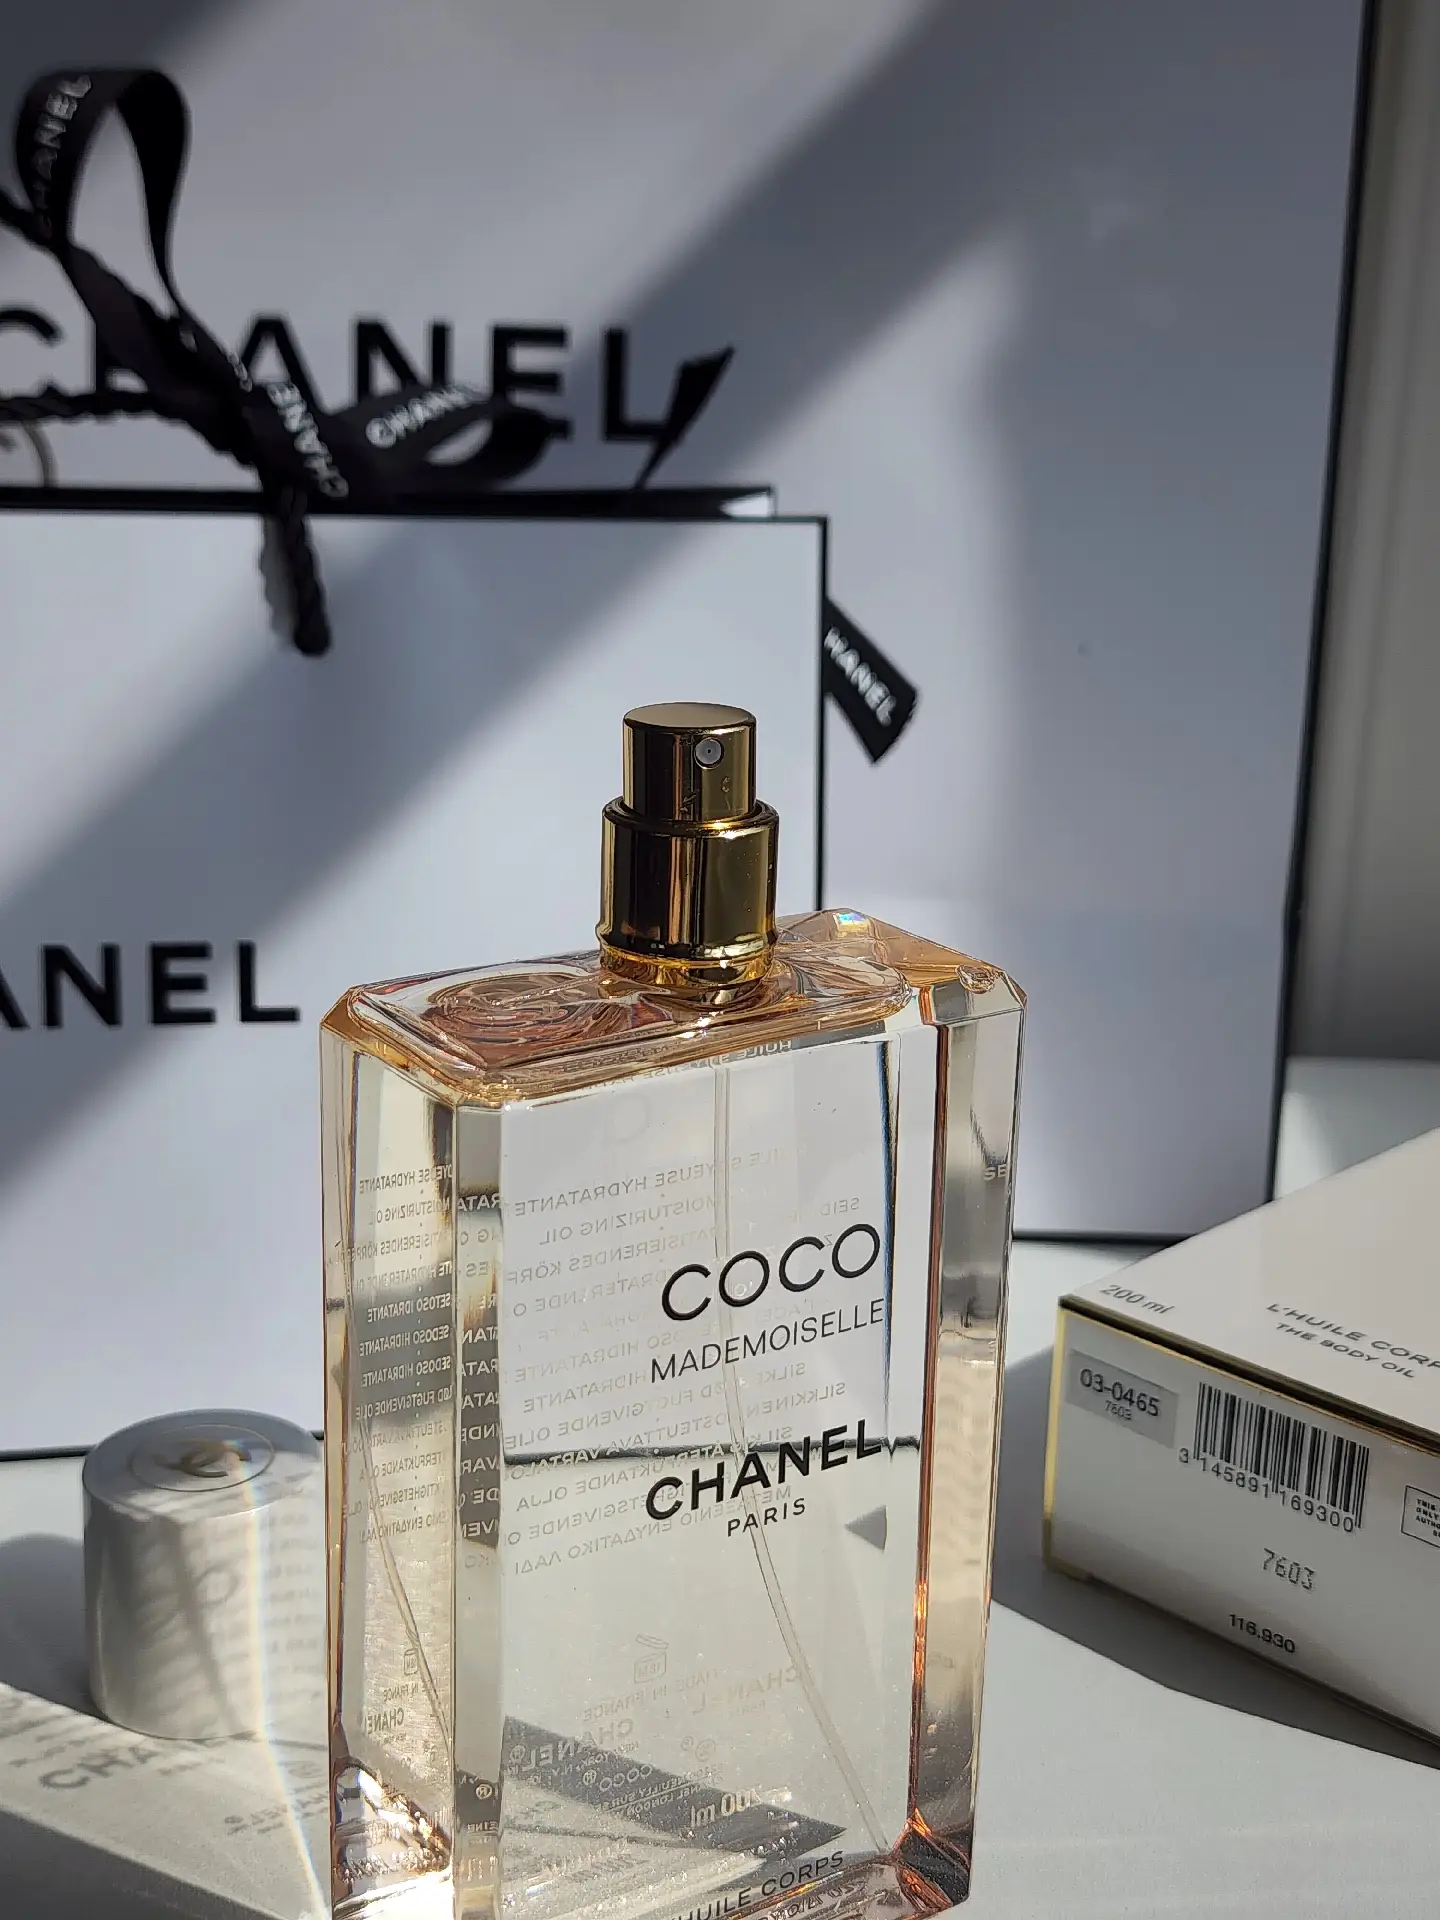 🌟Chanel Body Oil Smells Exactly Like Perfume, Super Rare, Gallery posted  by MimiLovesLuxe